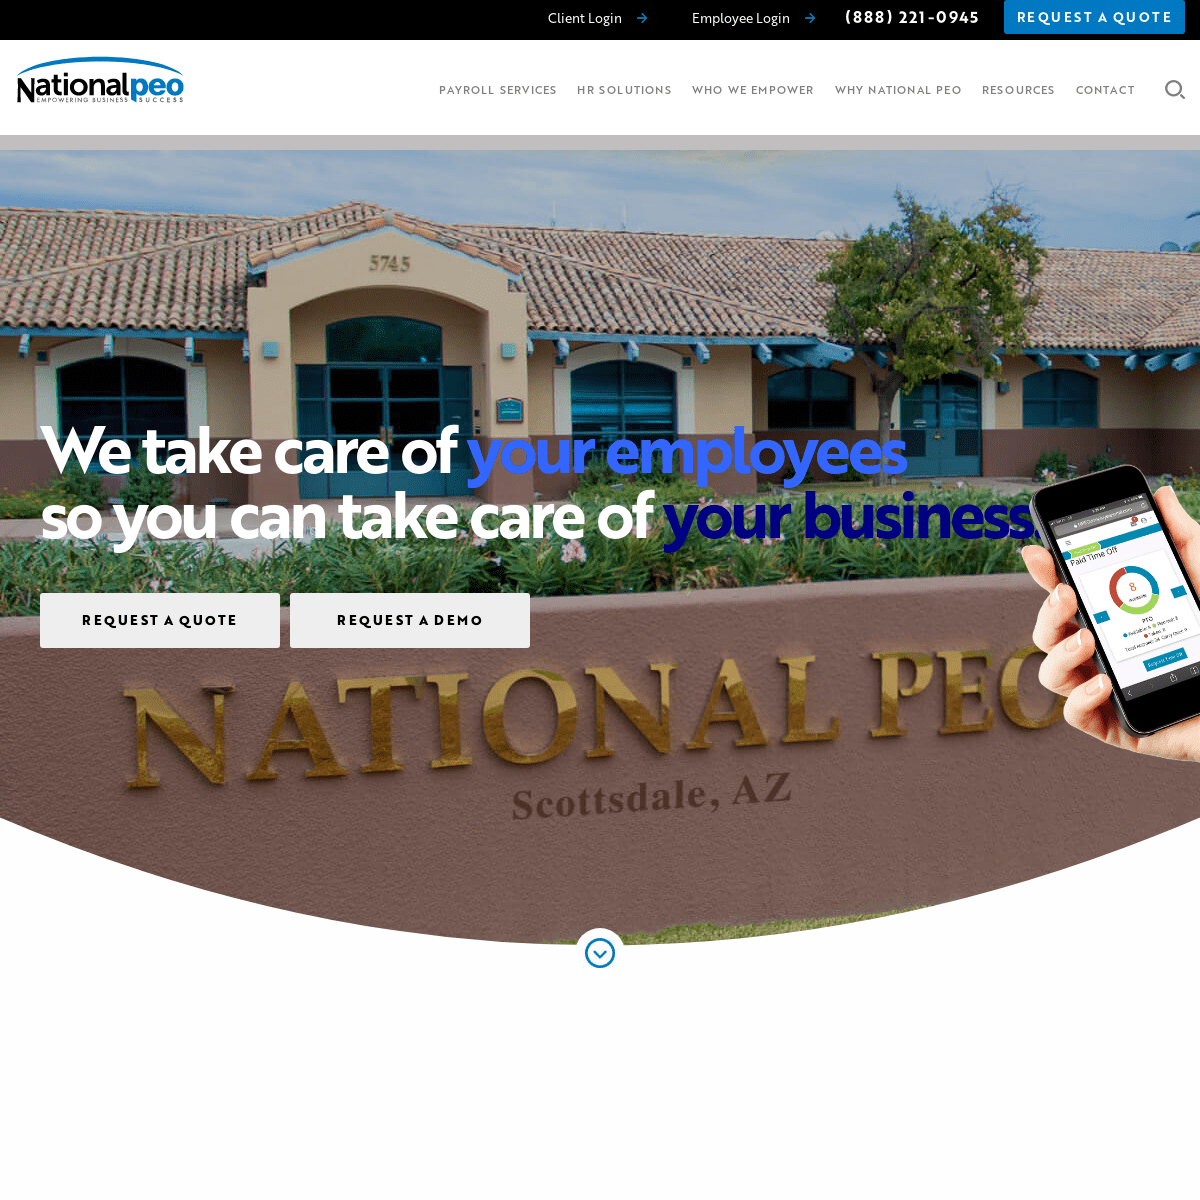 Welcome | National PEO | HR Outsourcing Services & Solutions